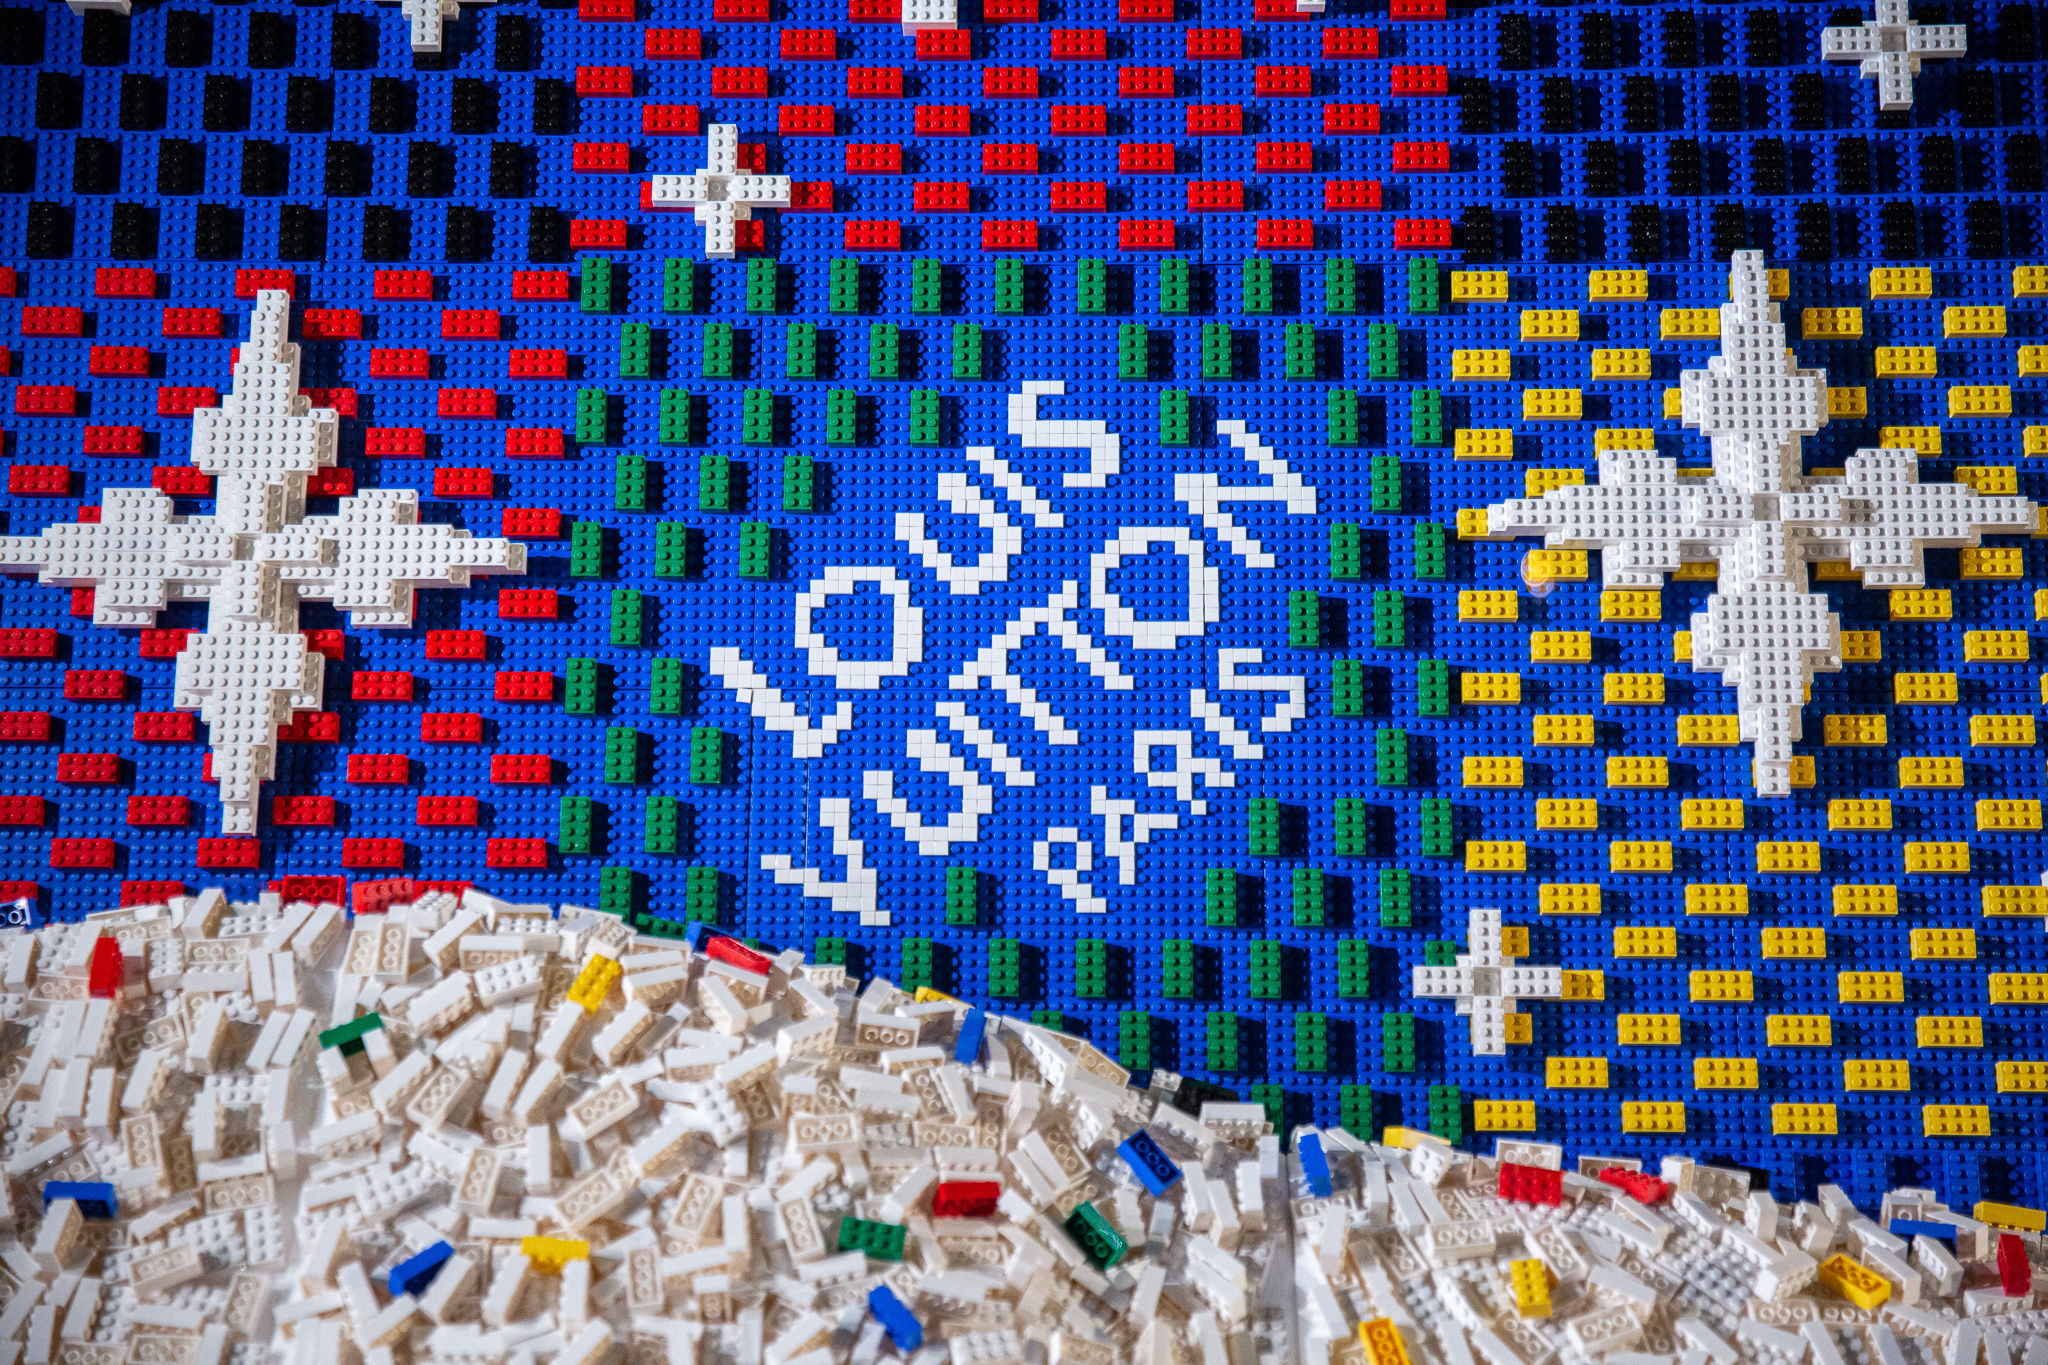 Louis Vuitton and LEGO Welcome the Holiday with Festive Store Displays